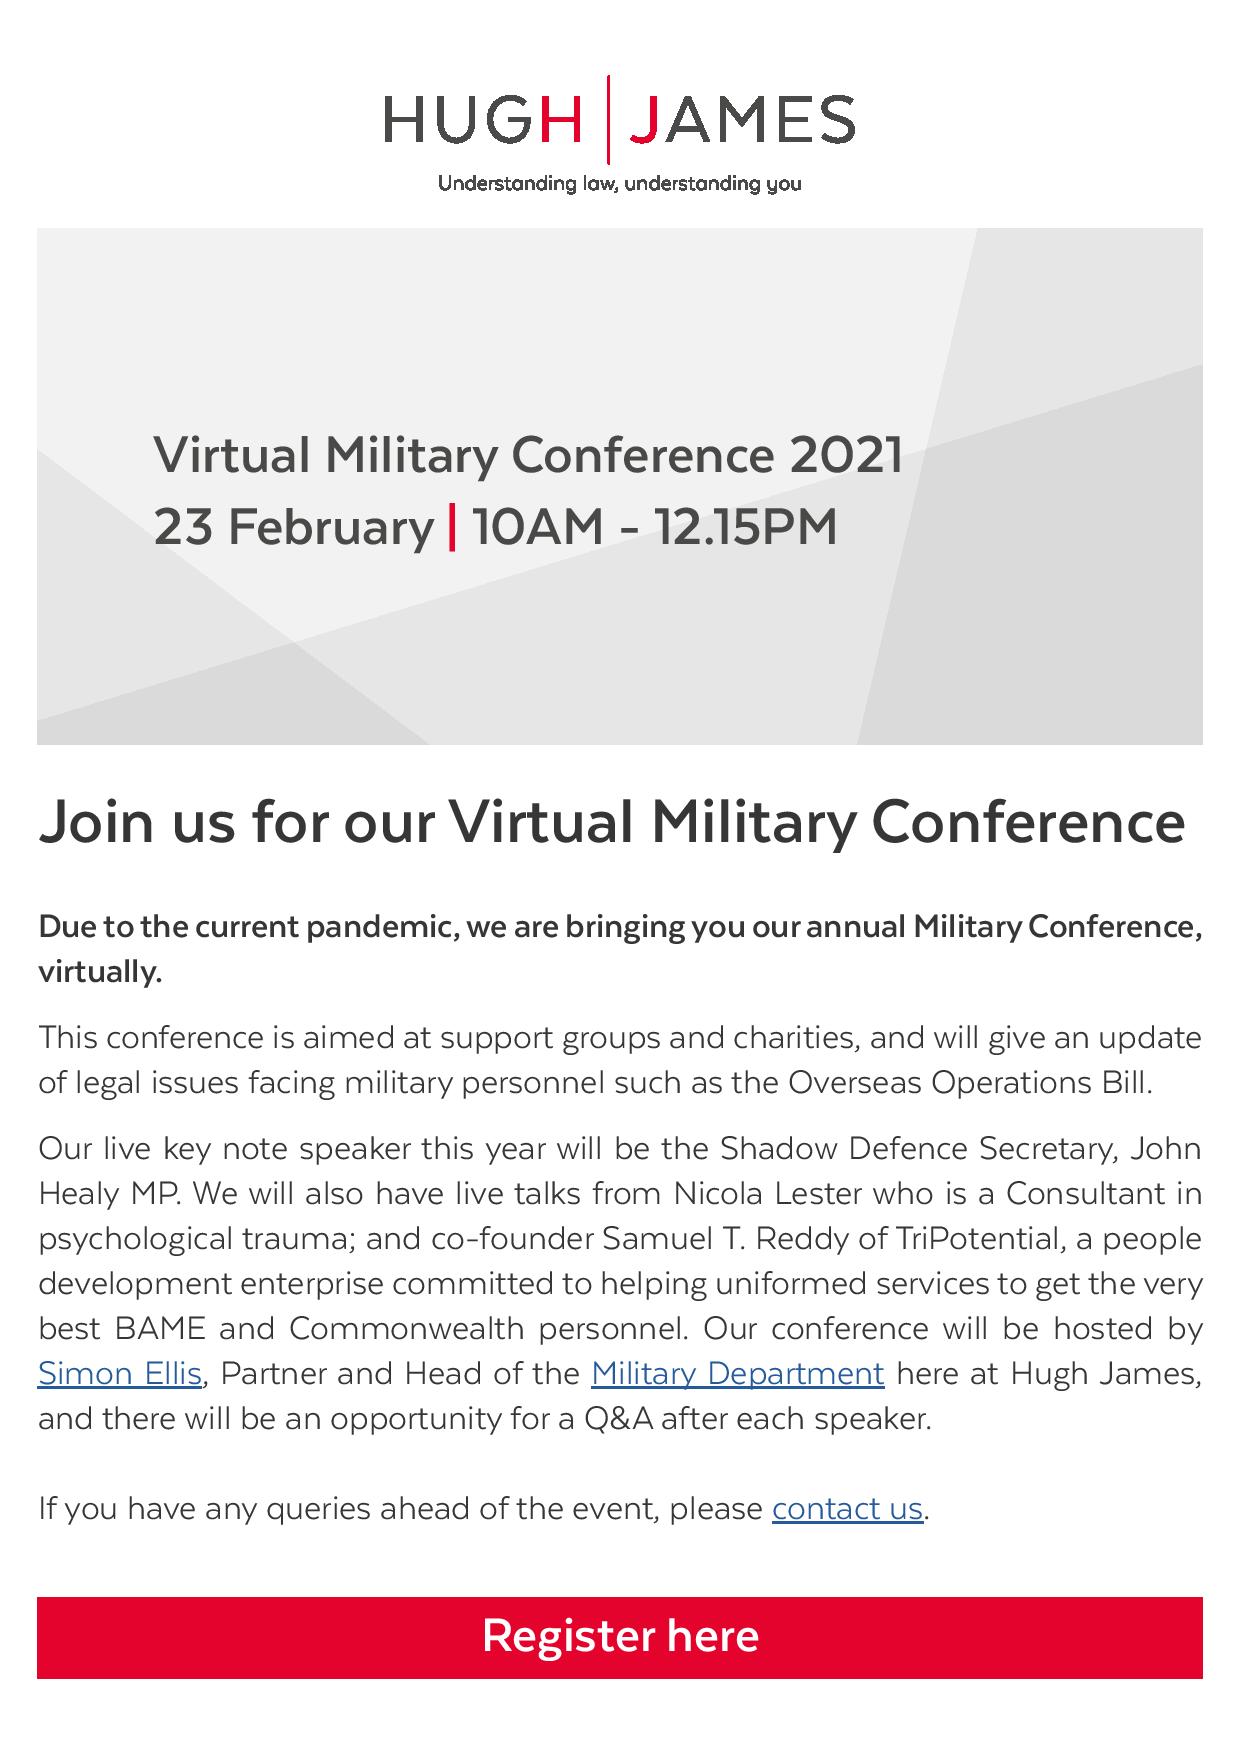 Join Hugh James For Their Virtual Military Conference